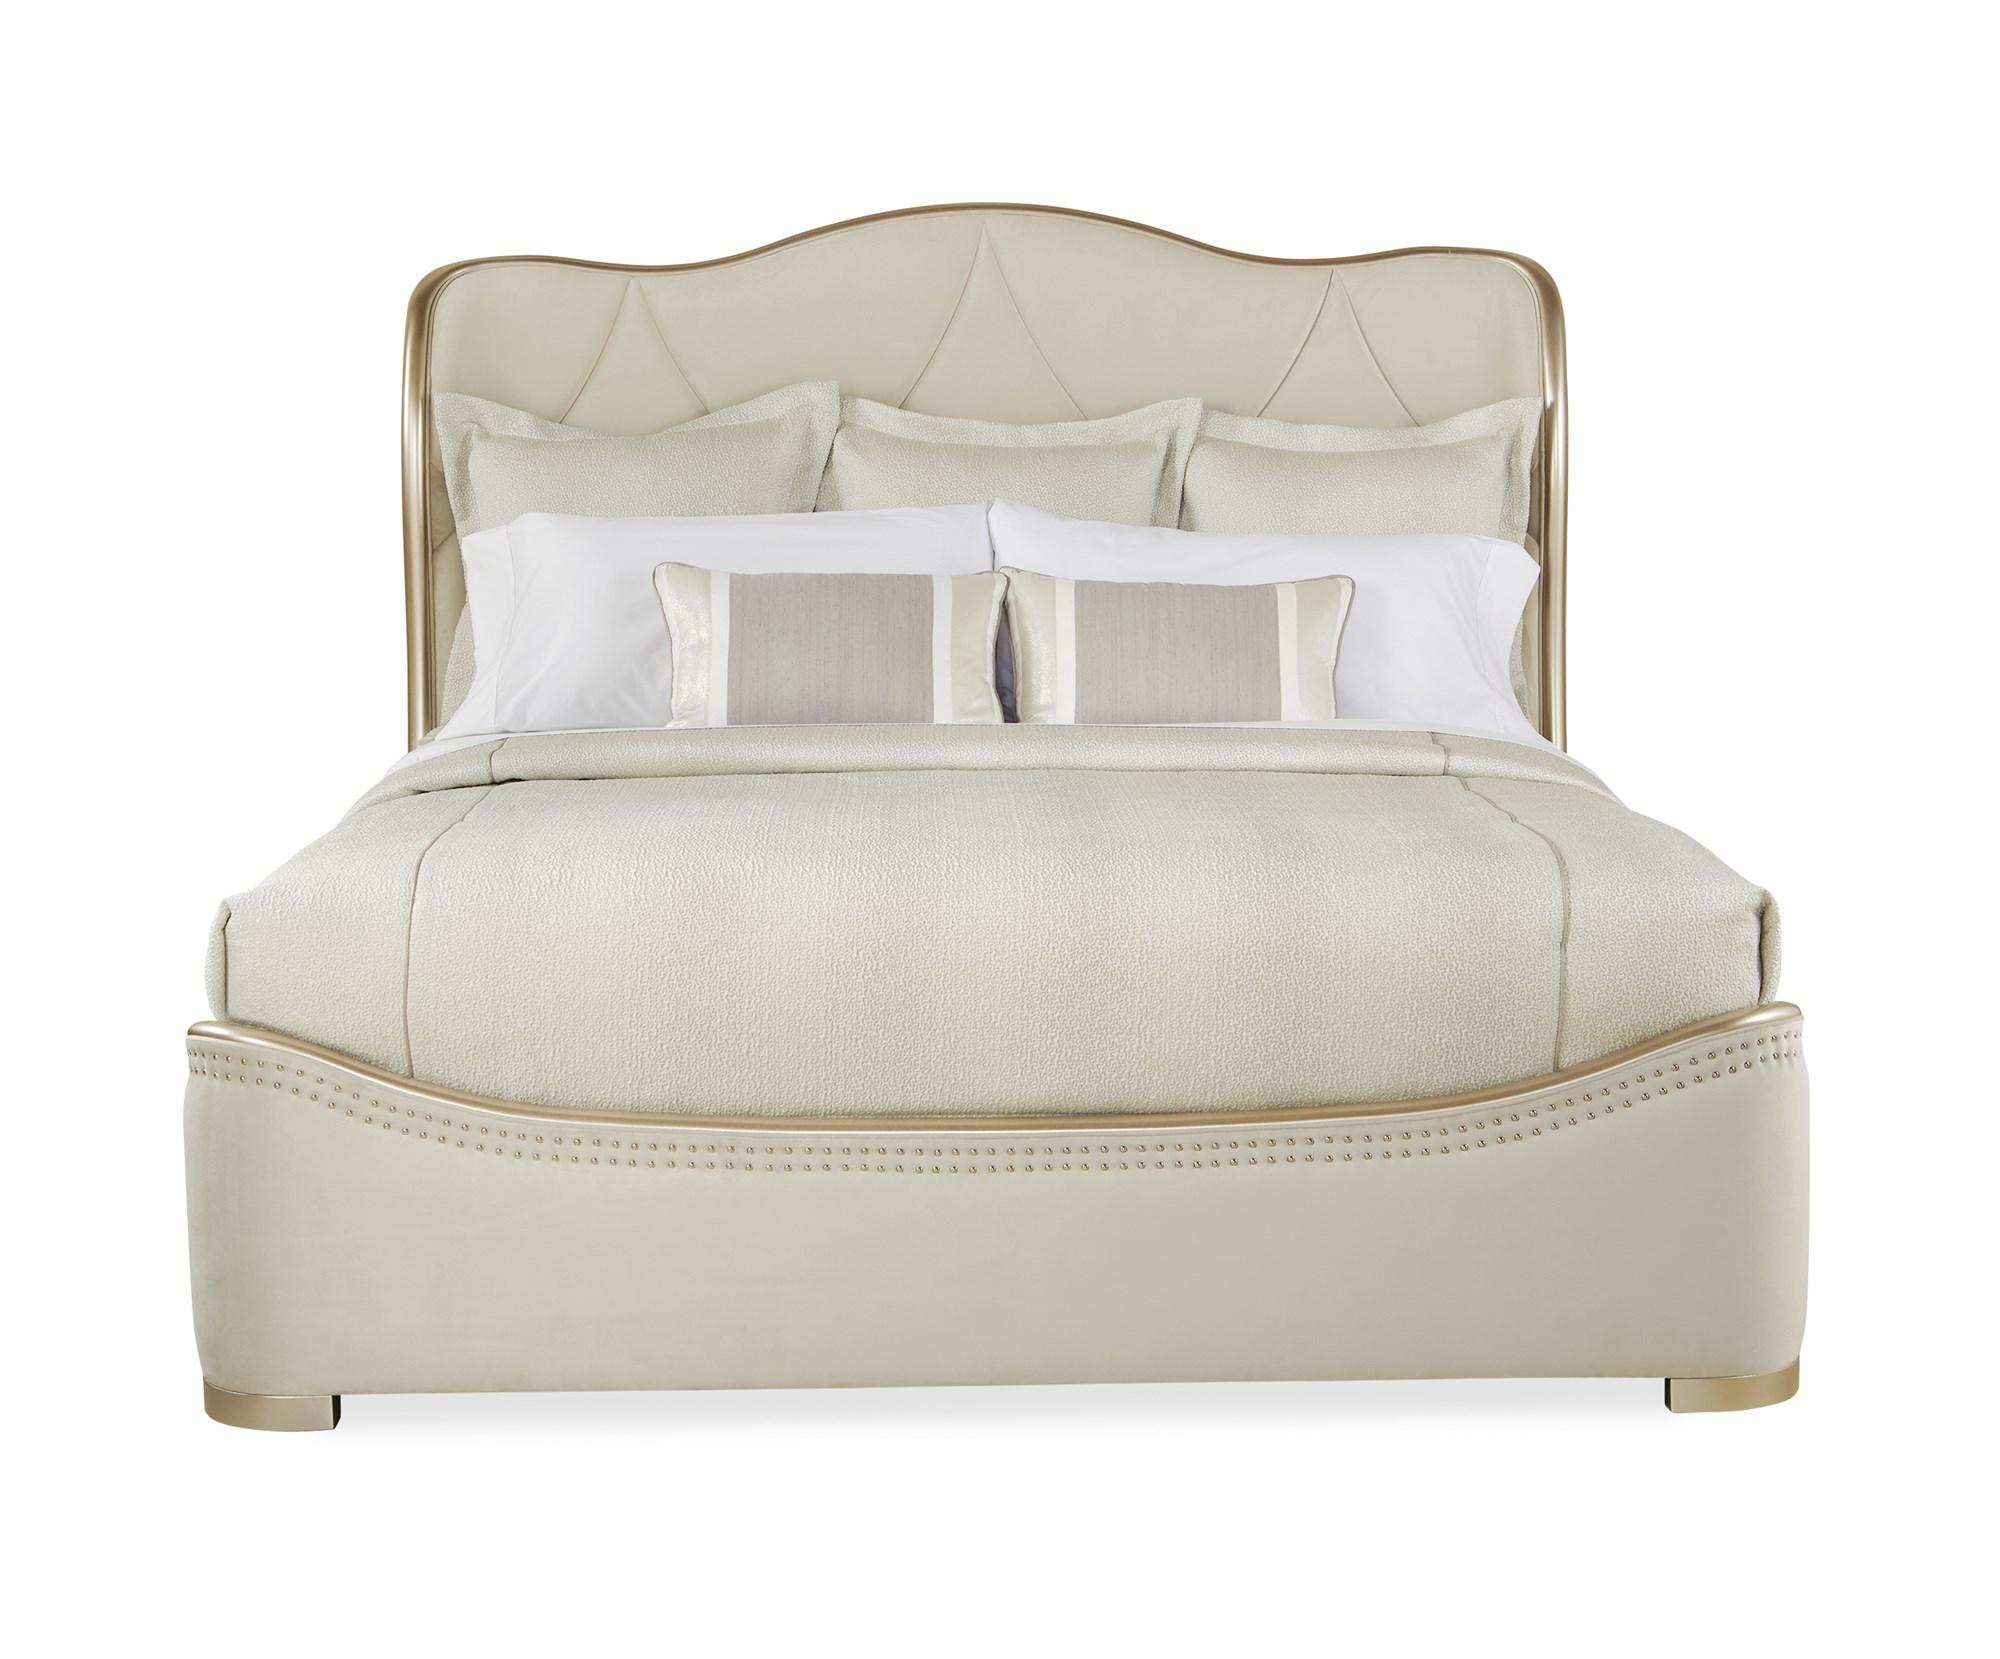 

    
Curvaceous Headboard Creamy Velvet Sleigh ADELA KING BED by Caracole
